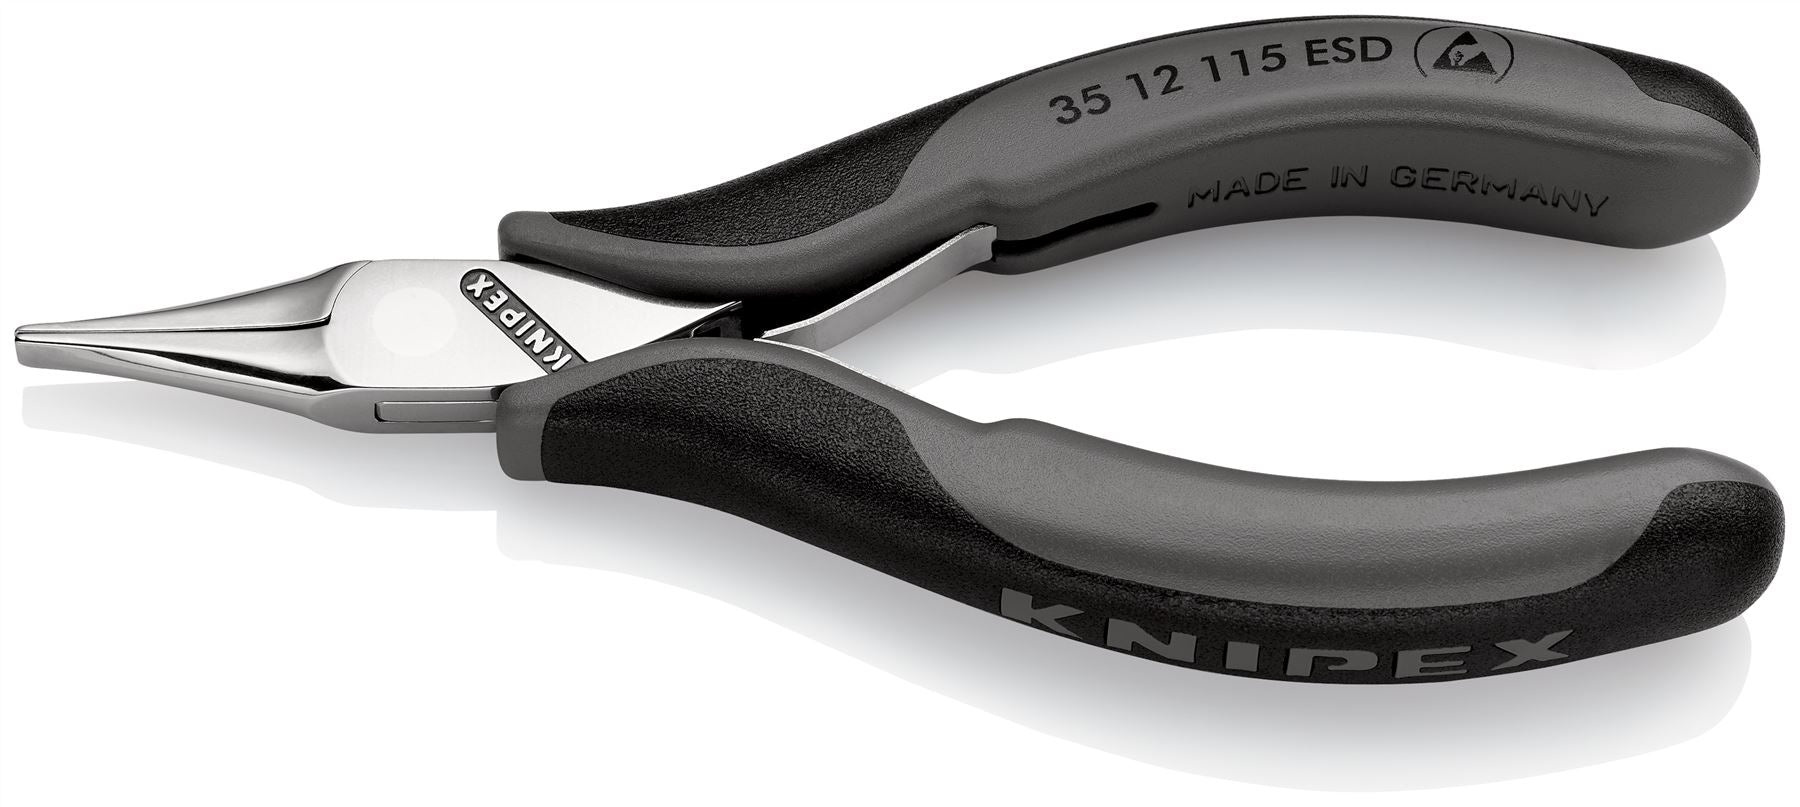 KNIPEX Precision Electronics Gripping Pliers ESD 115mm Black/Grey Multi Component Grips 35 12 115 ESD